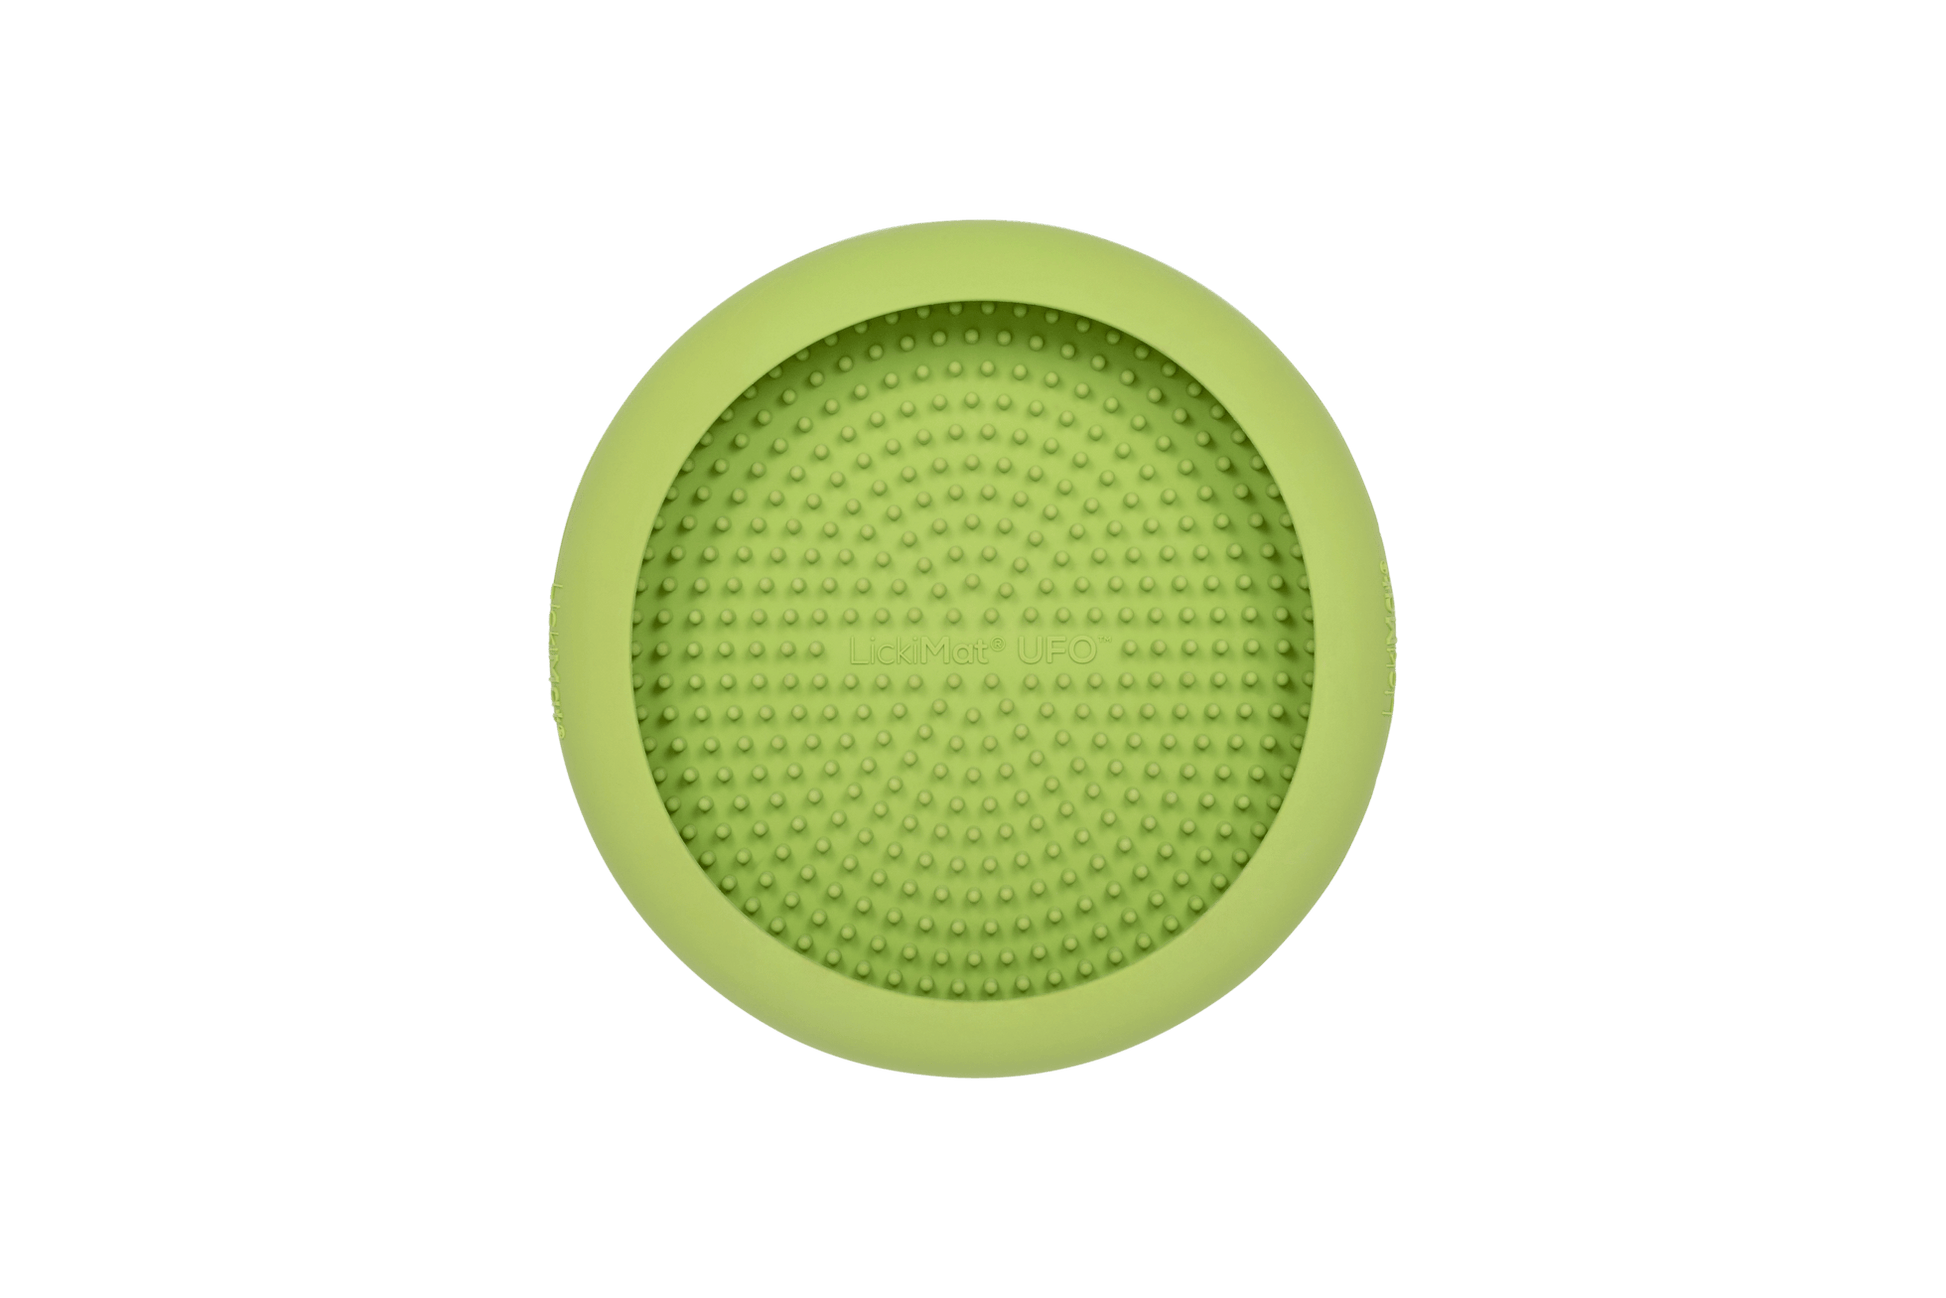 A green rubber bowl with numbs inside.